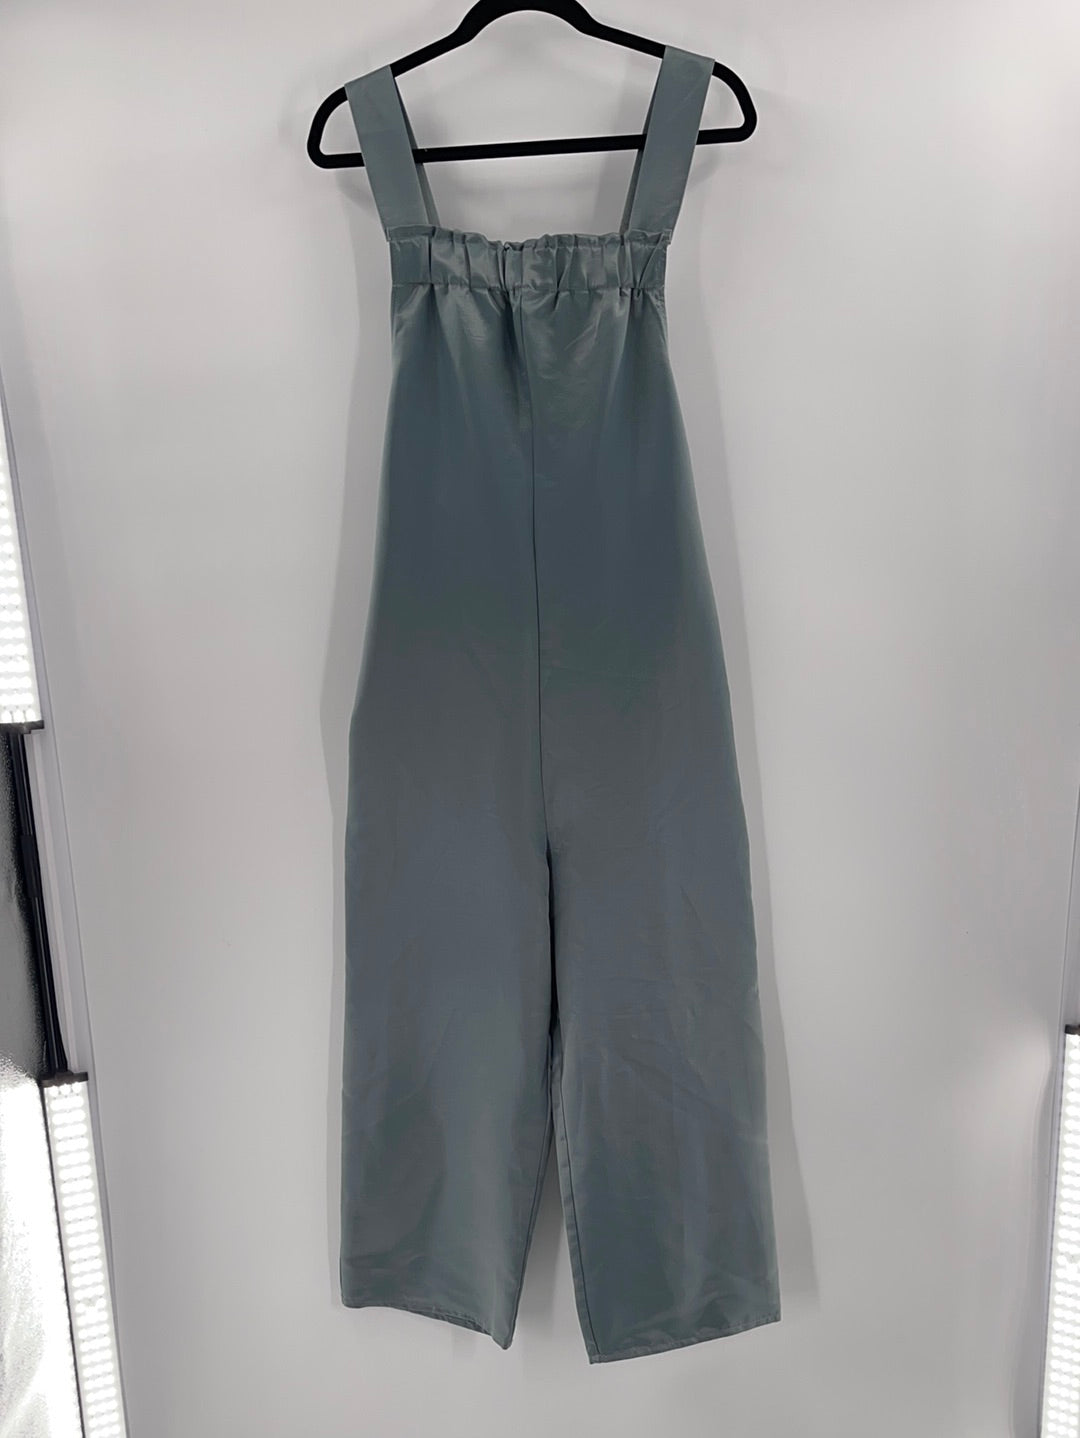 Urban Outfitters Pewter Satin Backless Tie on Back Side Knife Pockets (Size M)